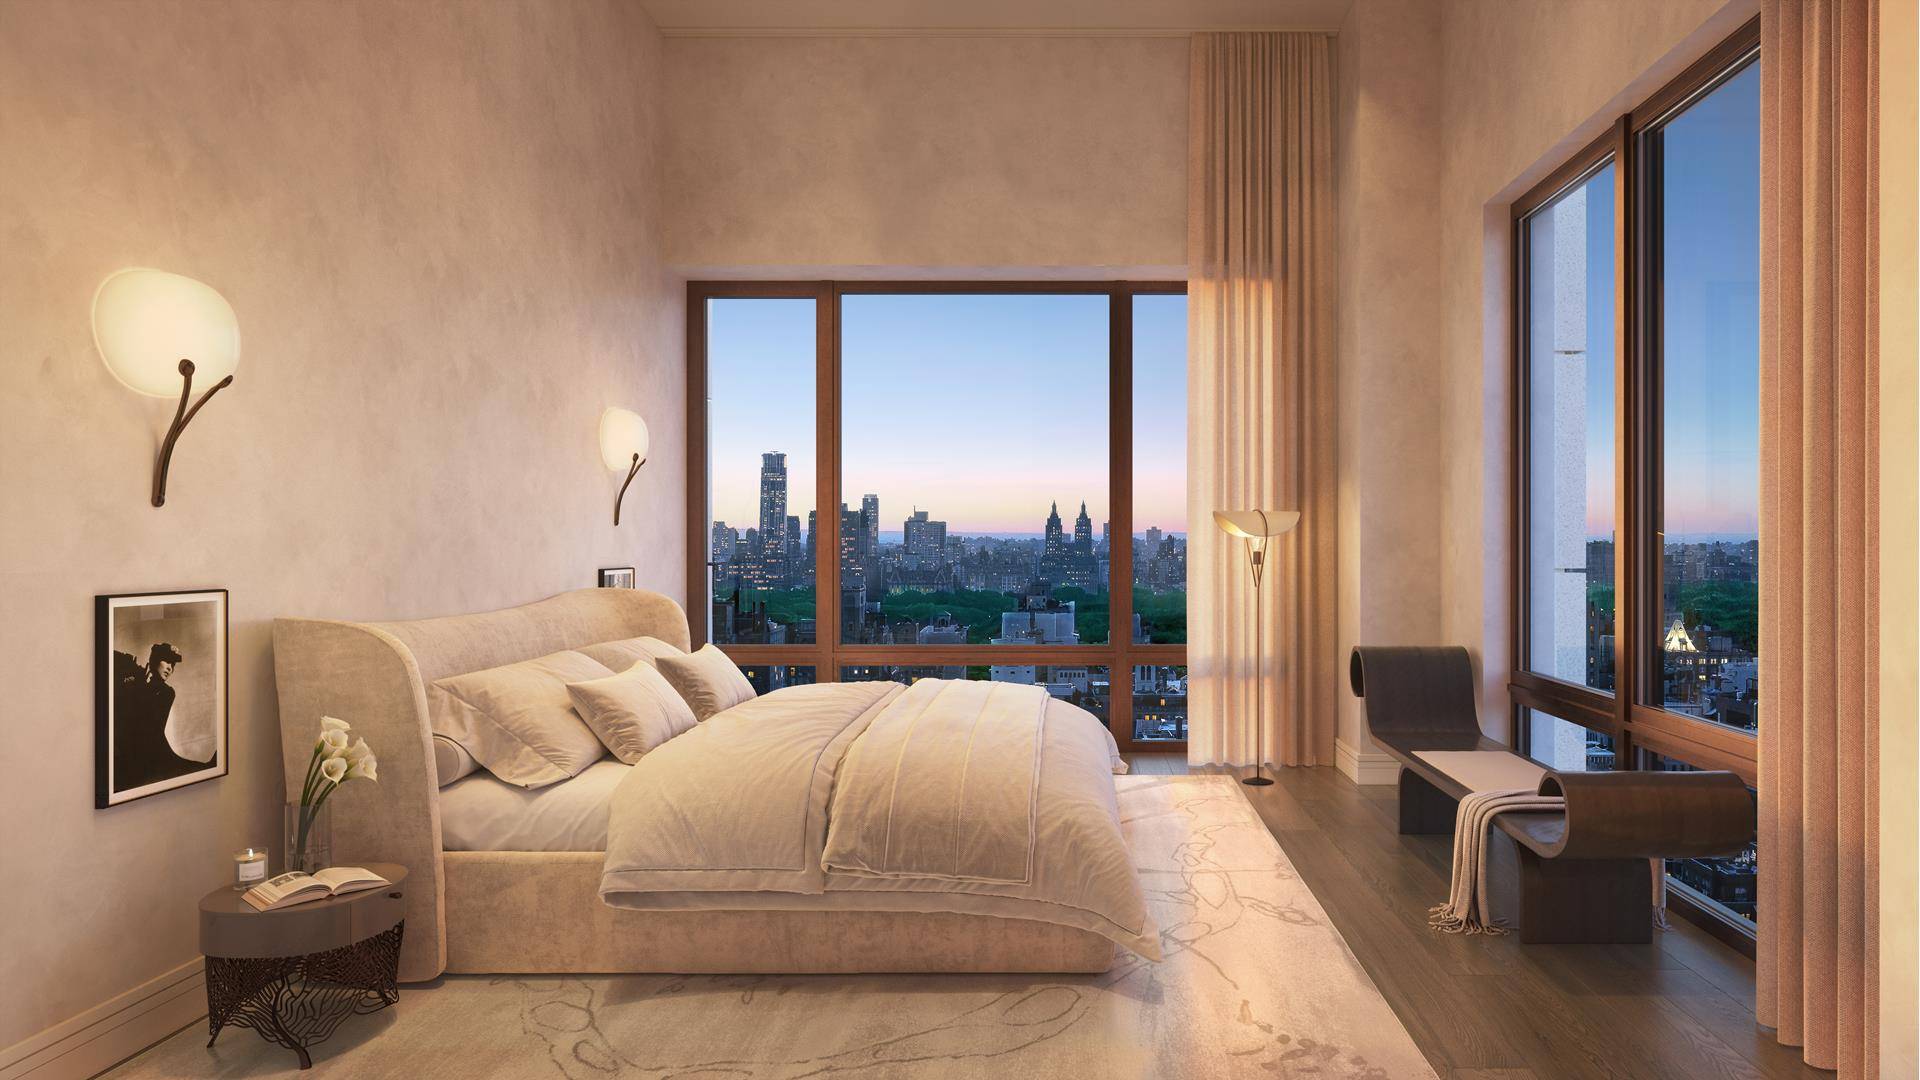 Introducing THE 74, where modernity meets the timeless sophistication on Manhattan's Upper East Side.